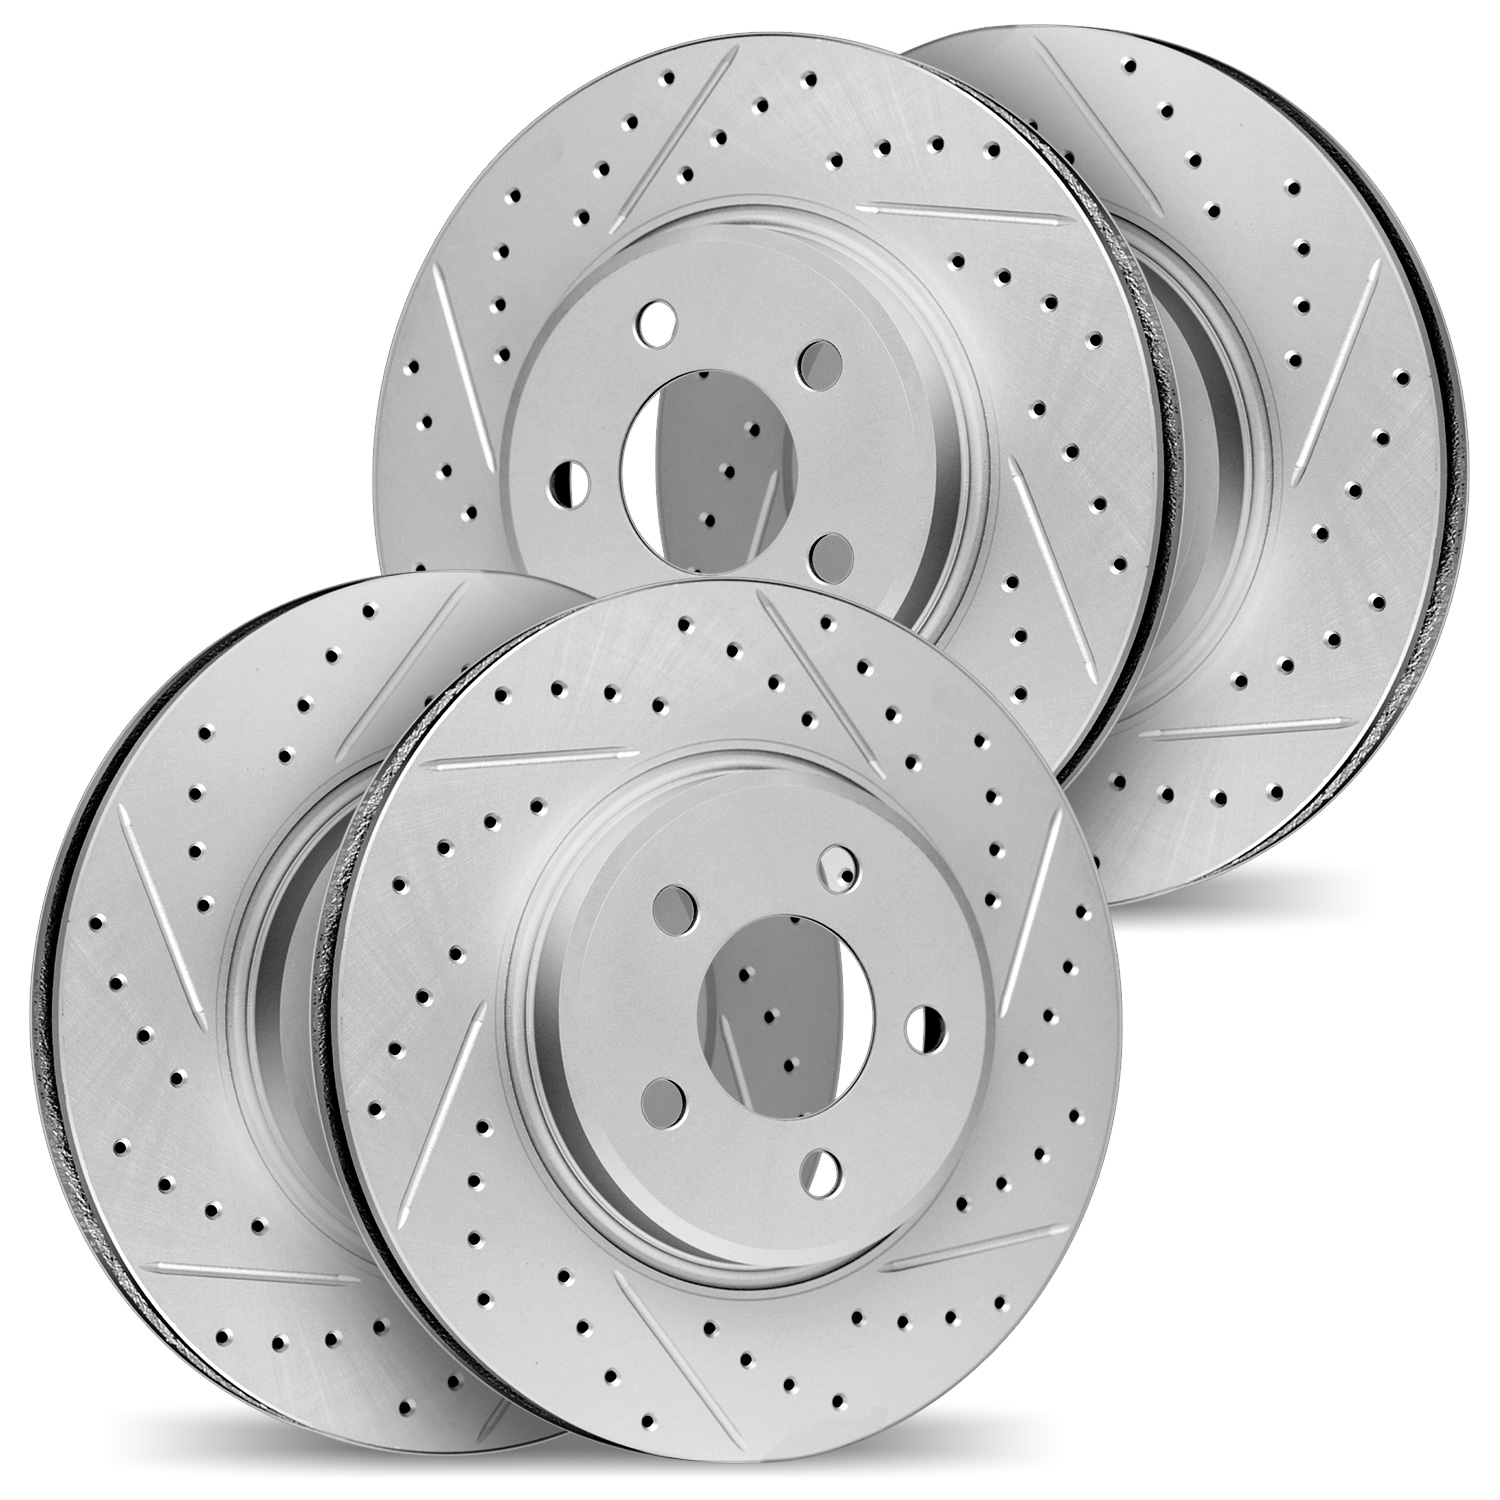 2004-76011 Geoperformance Drilled/Slotted Brake Rotors, 1998-2007 Lexus/Toyota/Scion, Position: Front and Rear